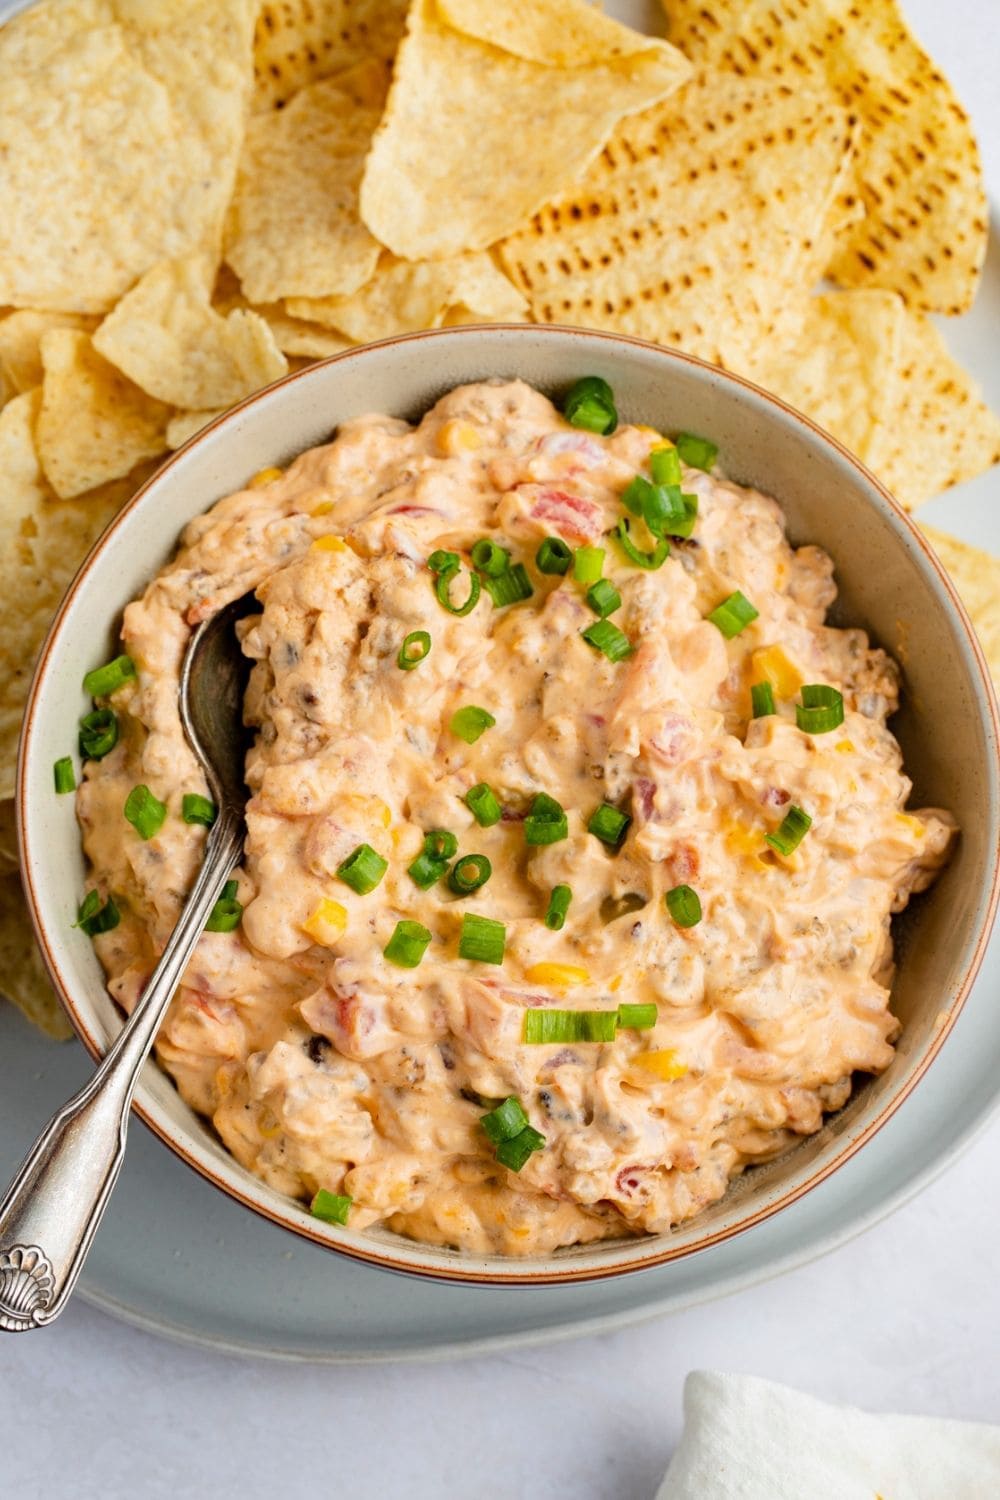 Bowl of cheesy cowboy crack dip with corn, onions and chips.